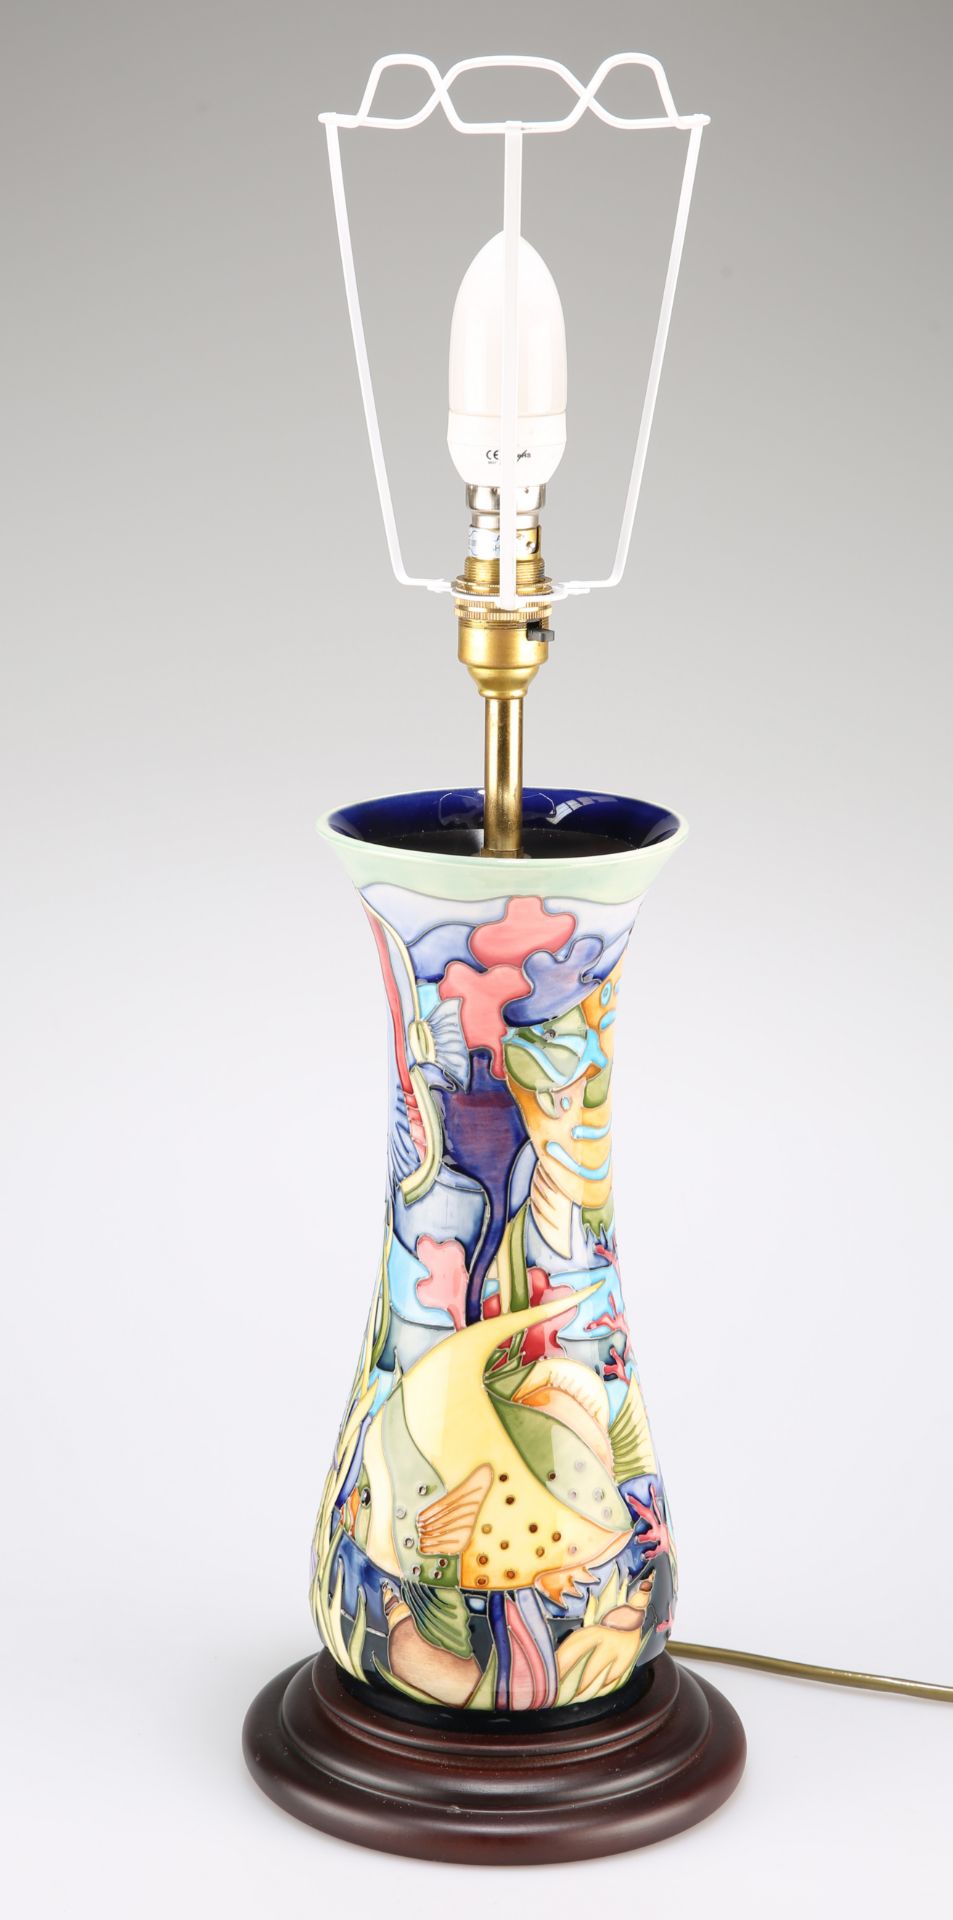 A MOORCROFT TABLE LAMP IN THE MARTINIQUE PATTERN, BY JEANNE MCDOUGALL